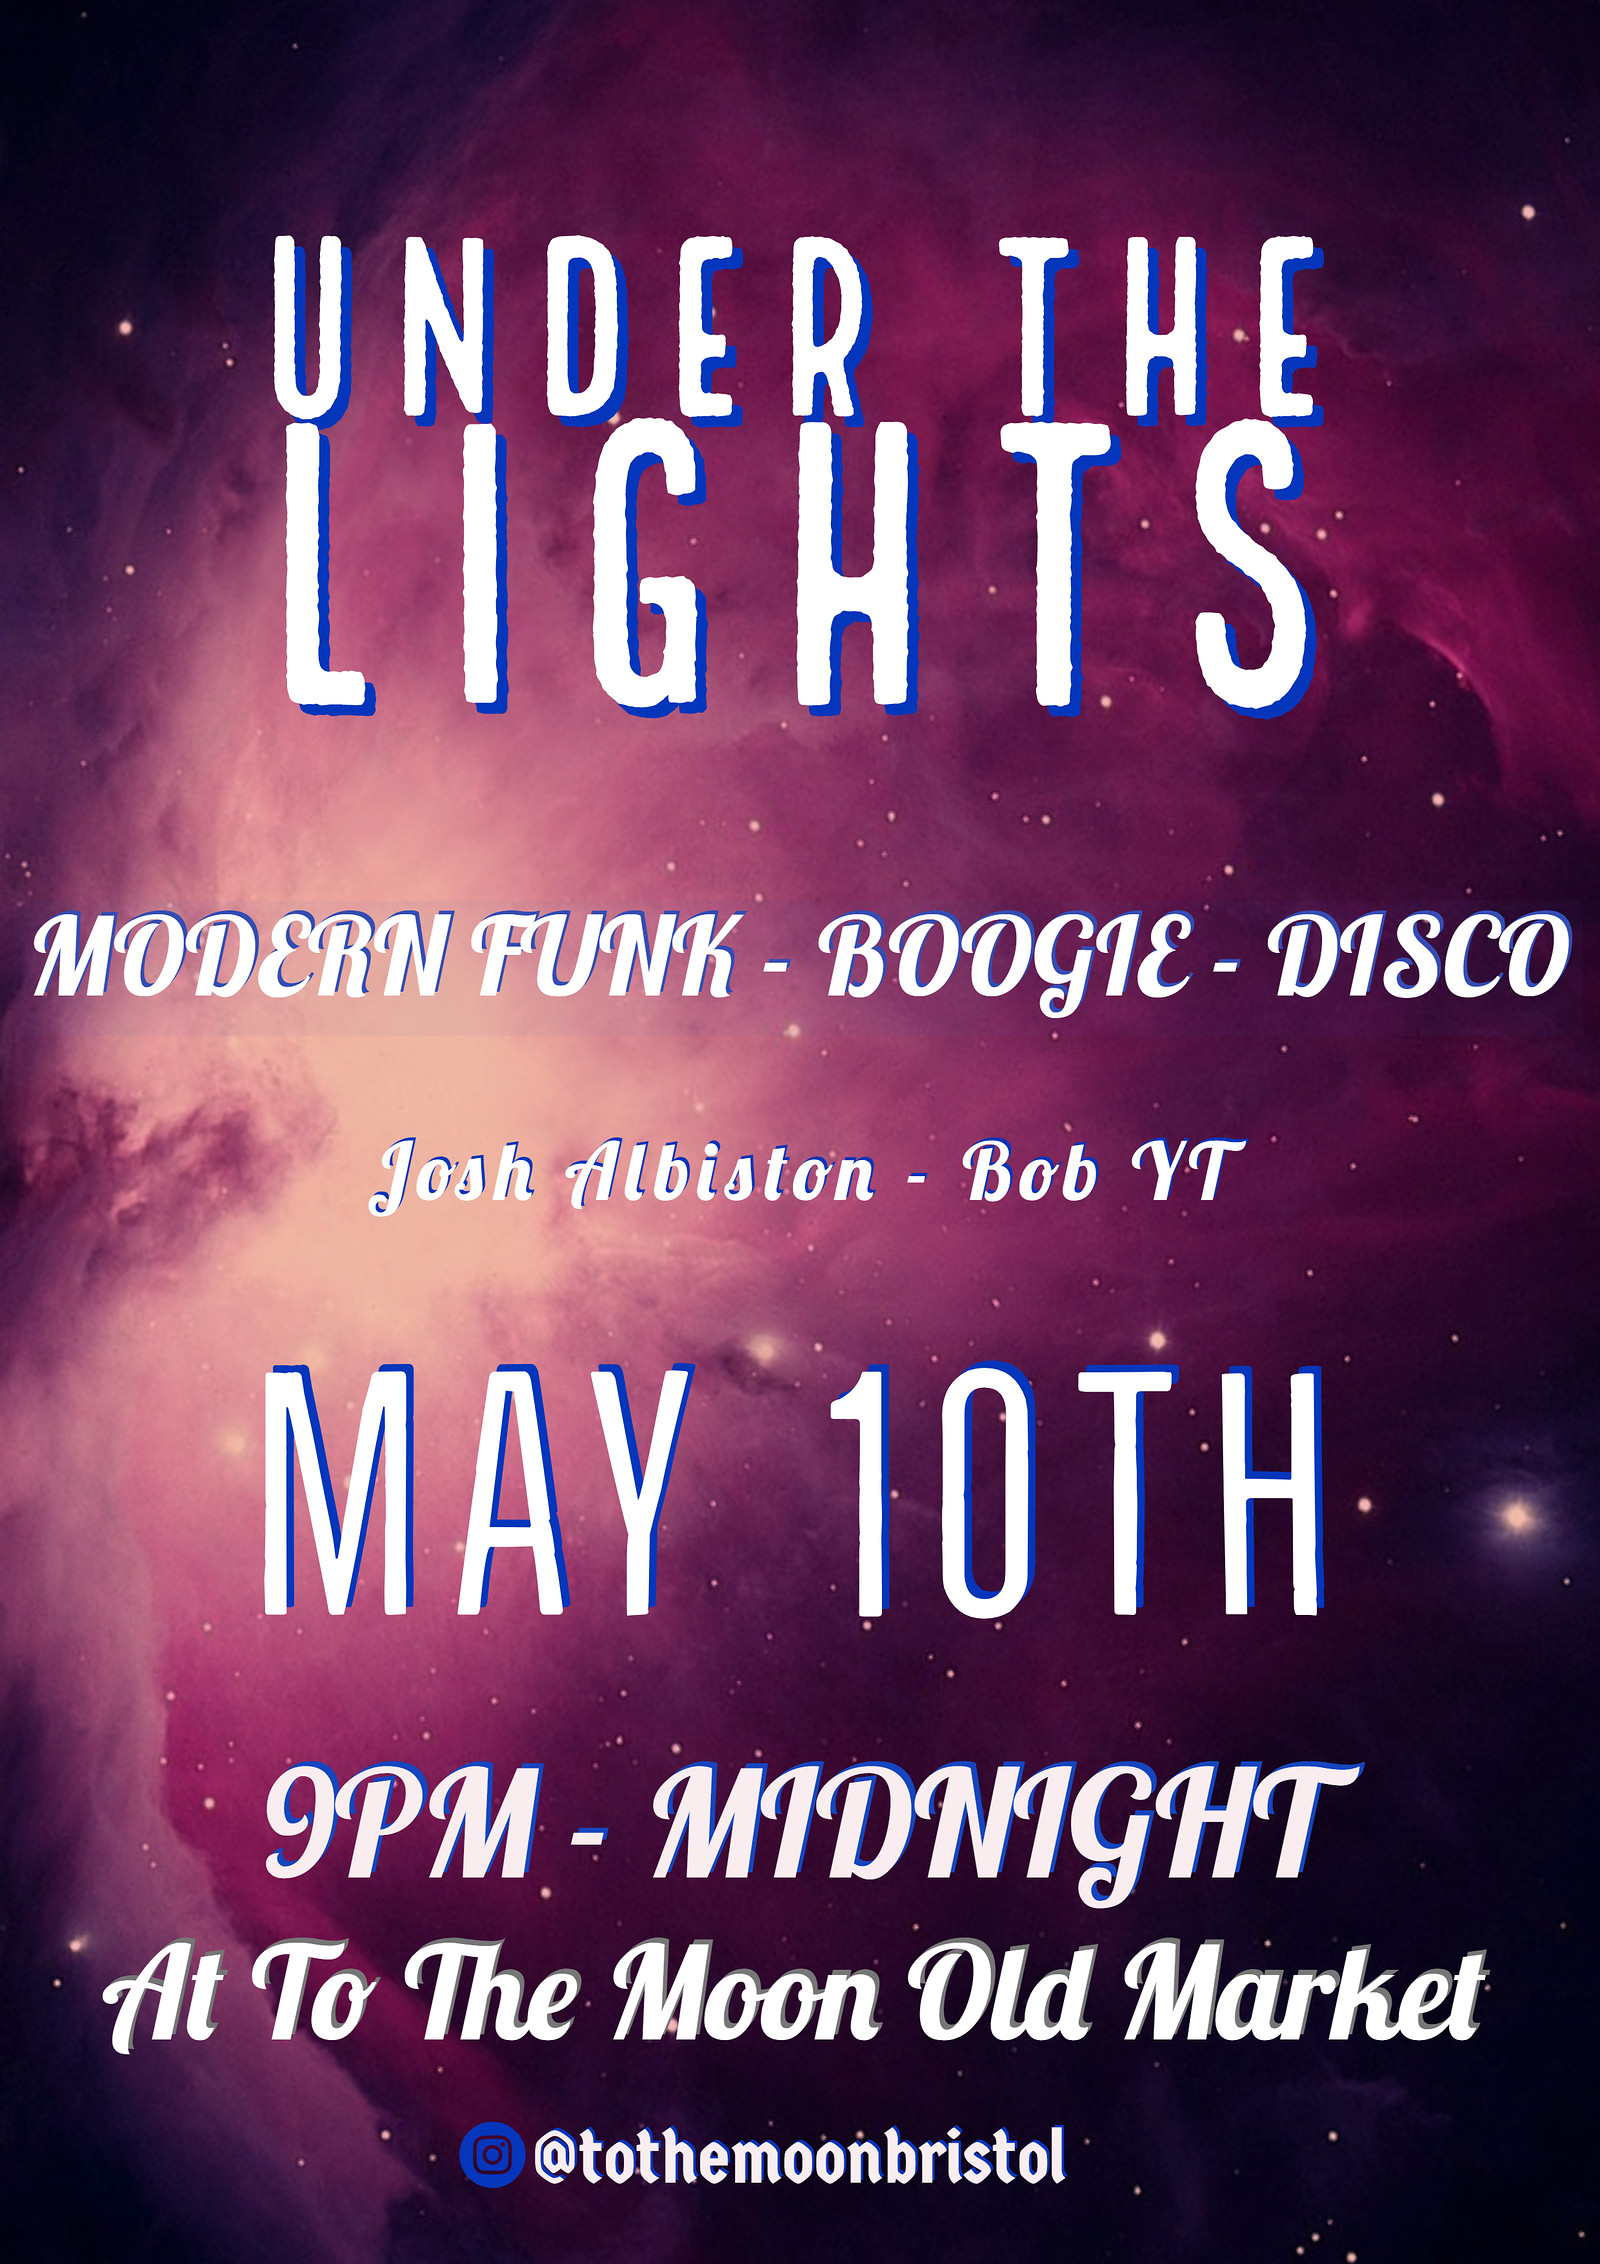 Under The Lights: Boogie, Modern, Funk, Disco at To The Moon